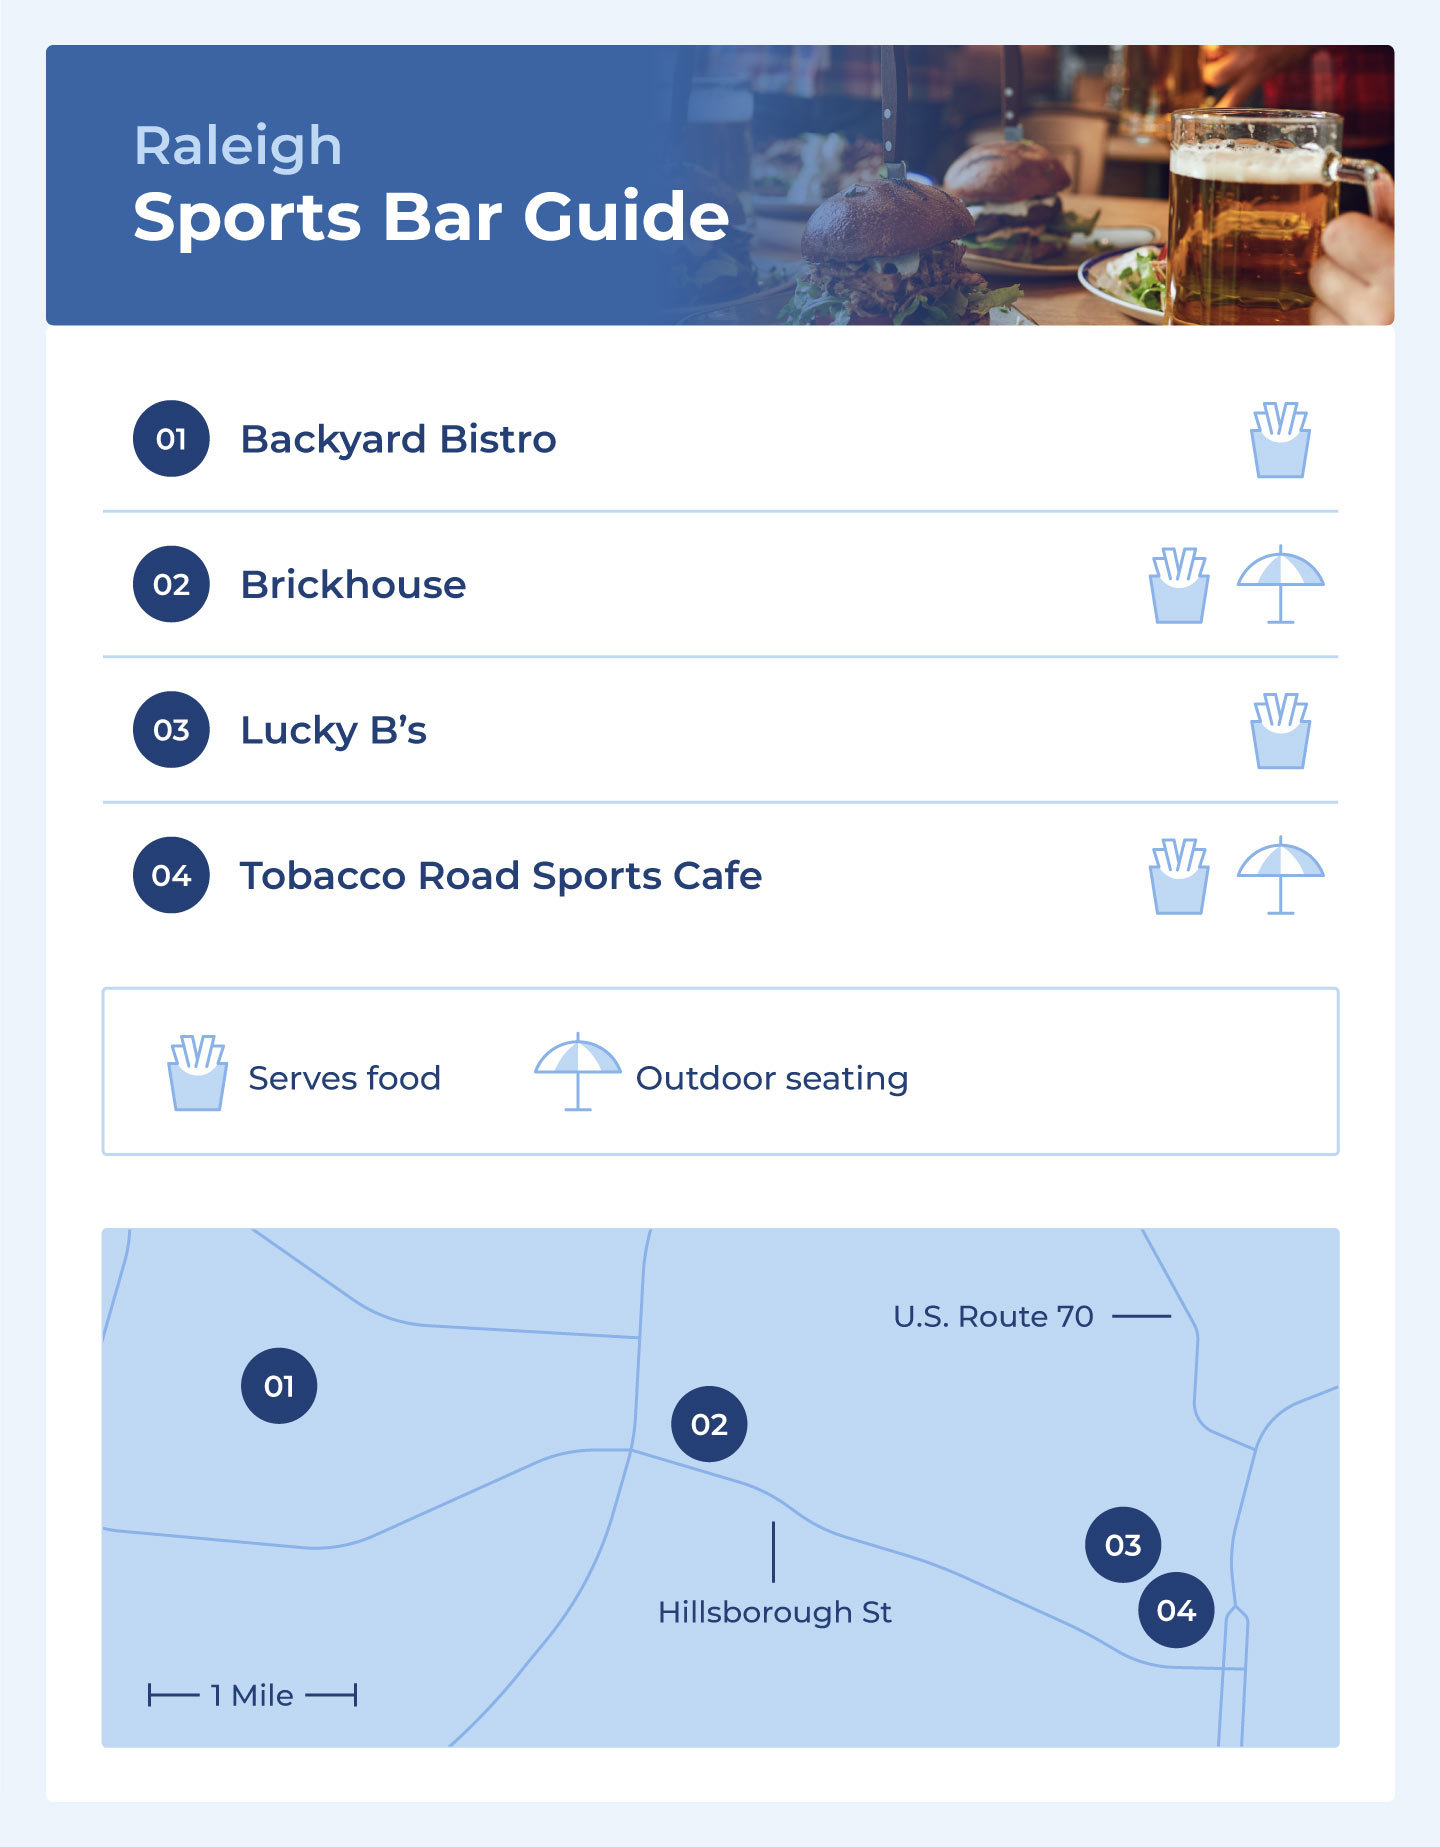 Recommended Raleigh sports bars are Backyard Bistro, Brickhouse, Lucky B's, and Tobacco Road Sports Cafe.